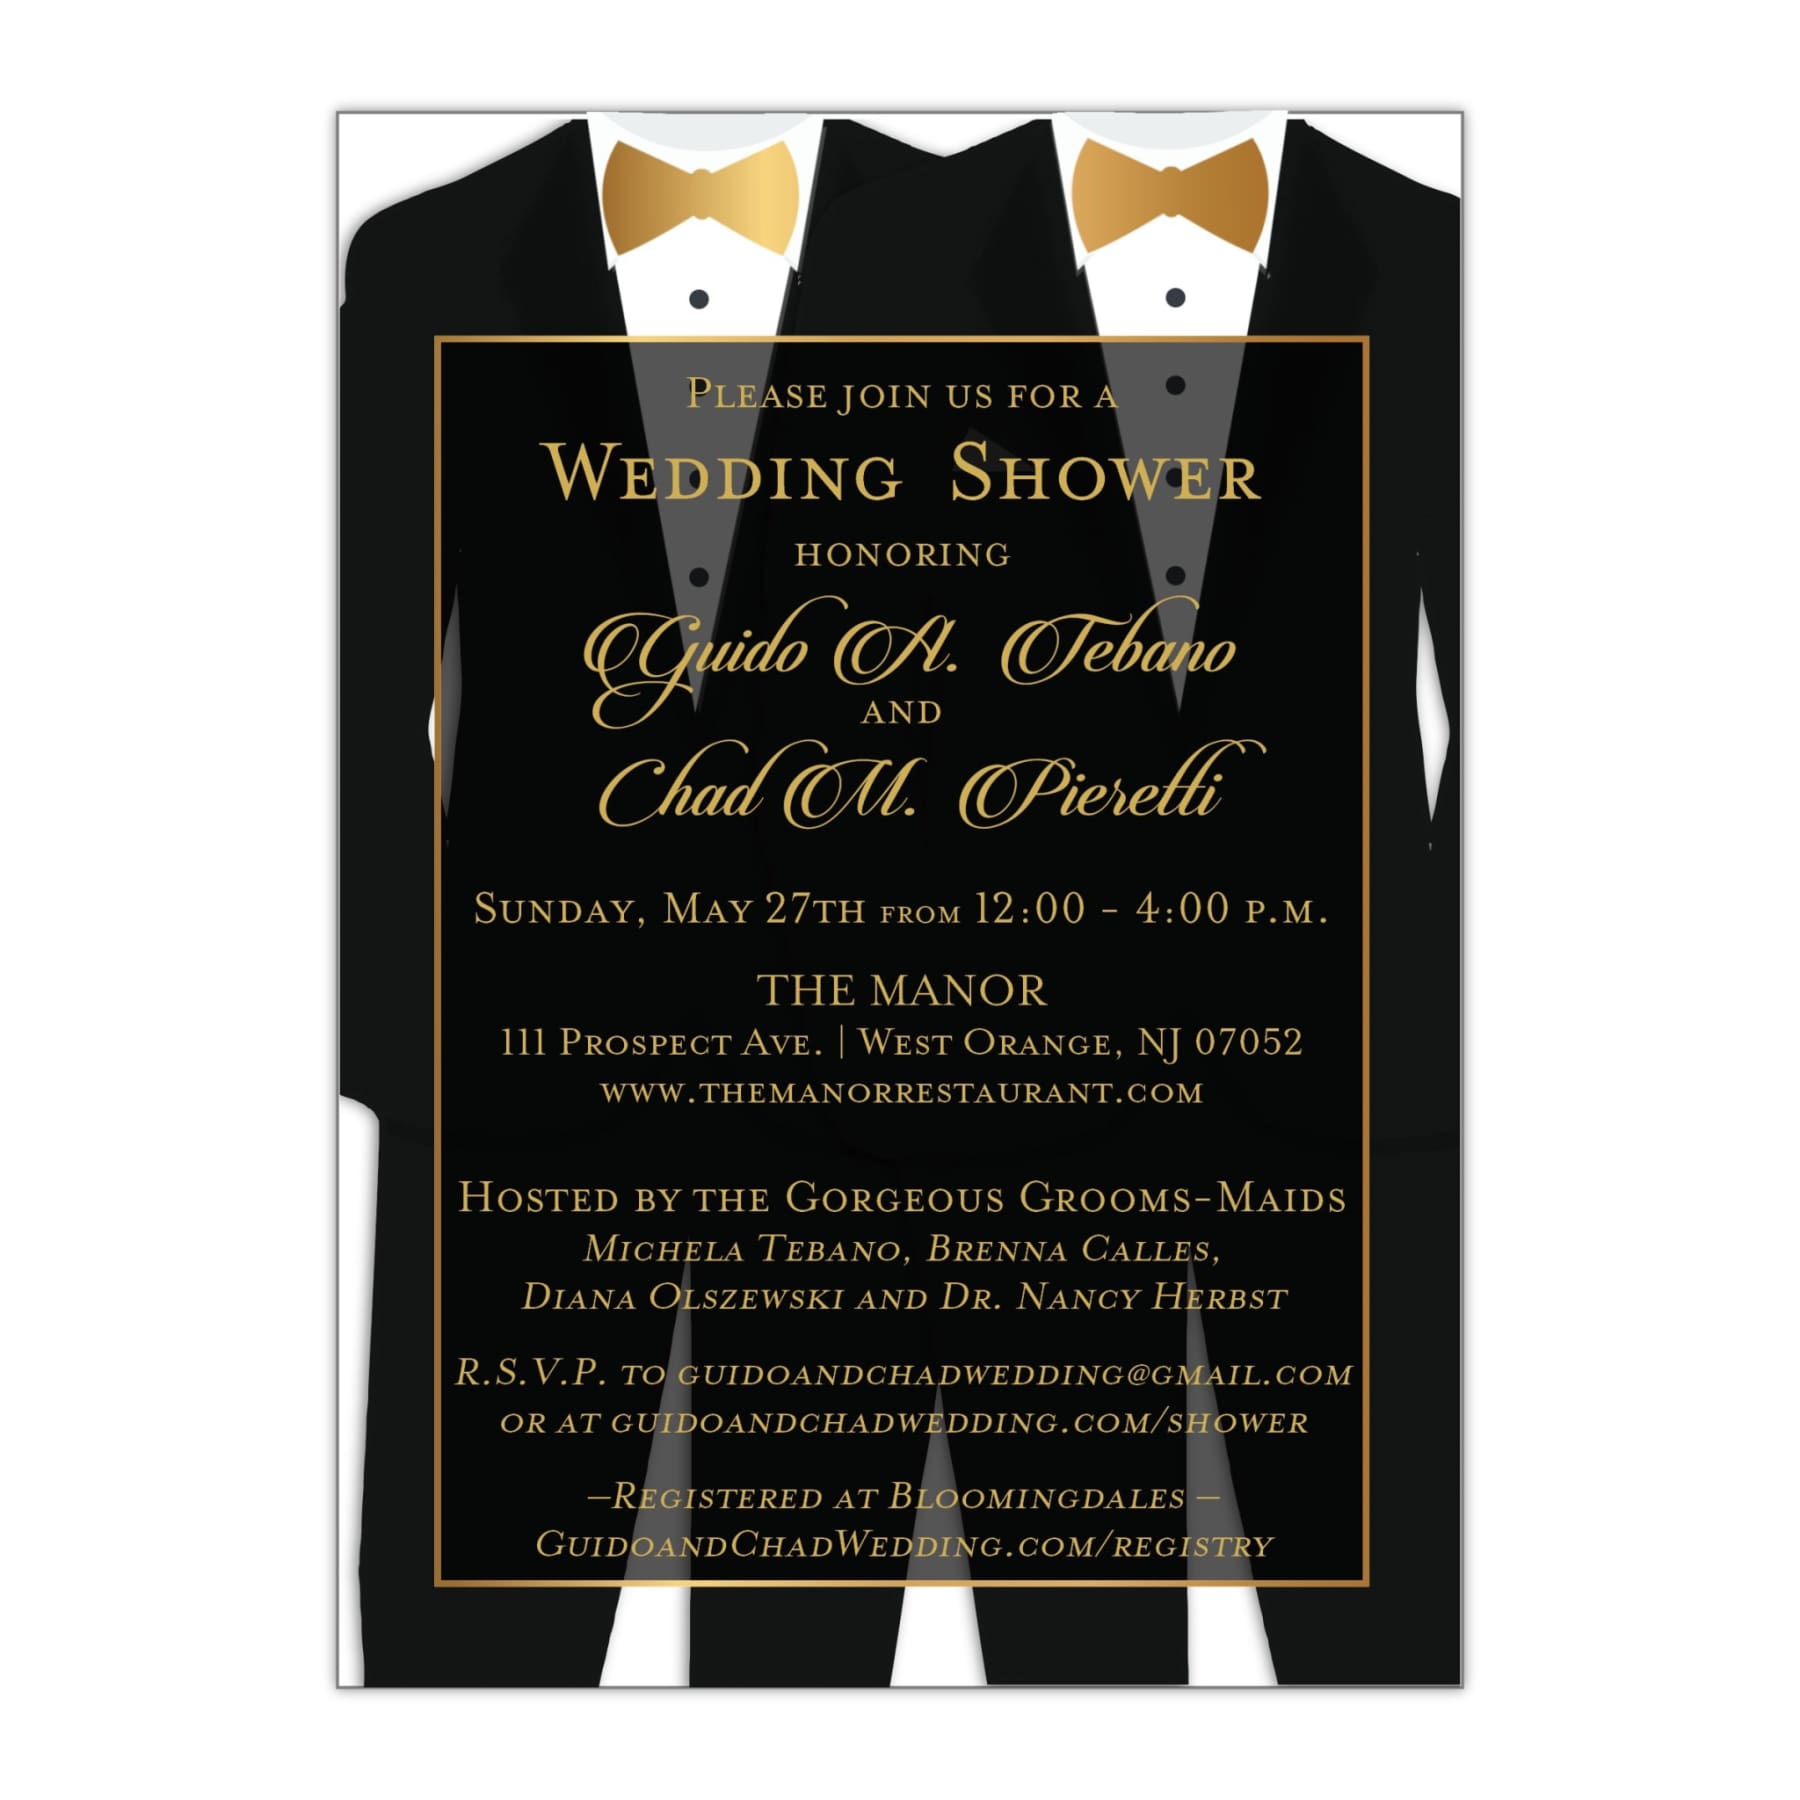 Gay Two Tuxedos Wedding Shower Invitation - All That Glitters Invitations